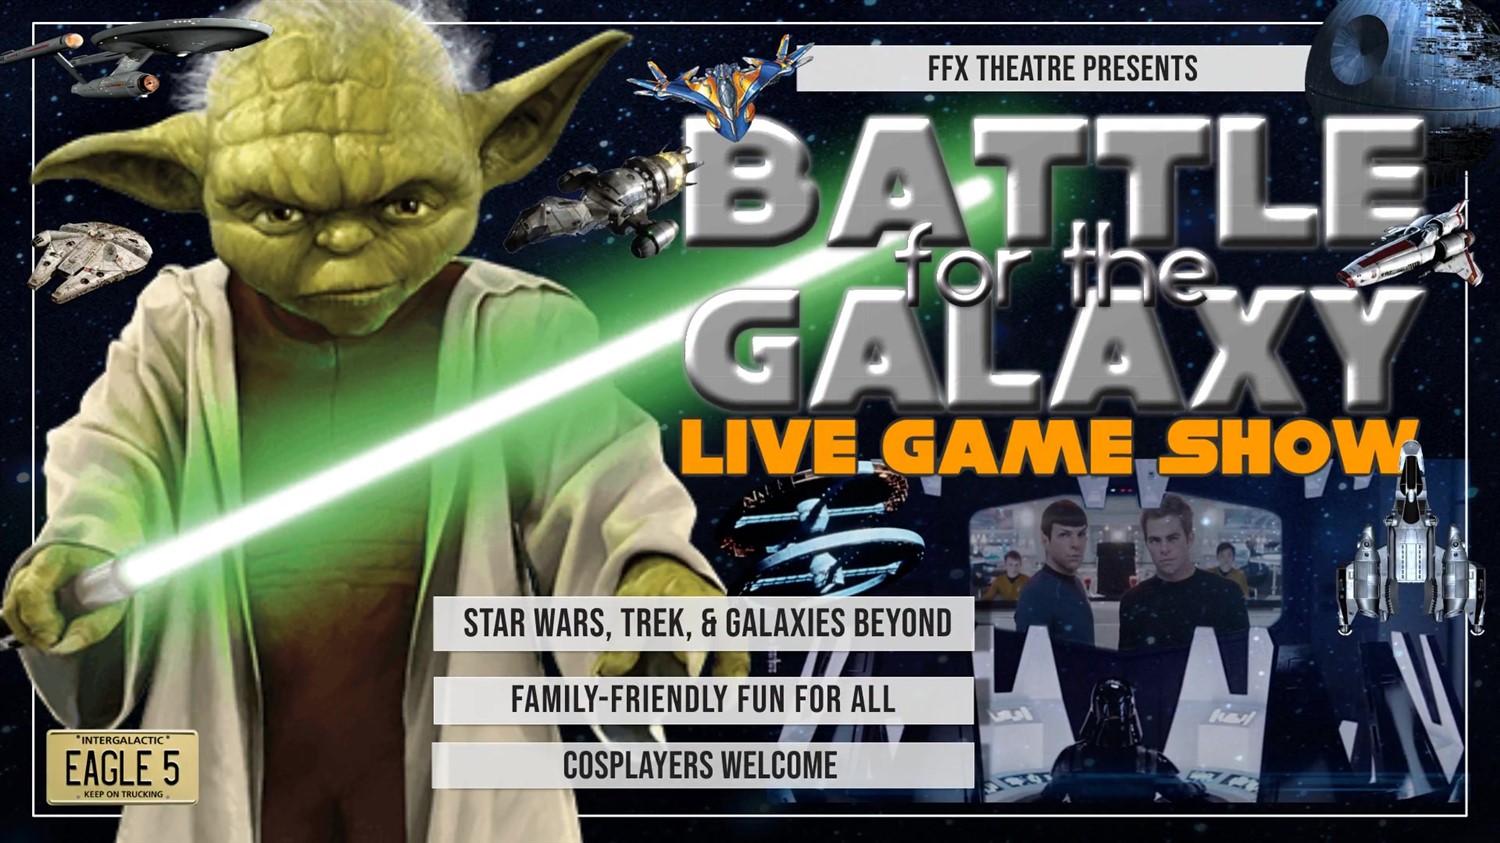 Battle for the Galaxy: Live Game Show  on ene. 29, 19:00@FFX Theatre - Buy tickets and Get information on Family Fun Xperience tickets.ffxshow.org